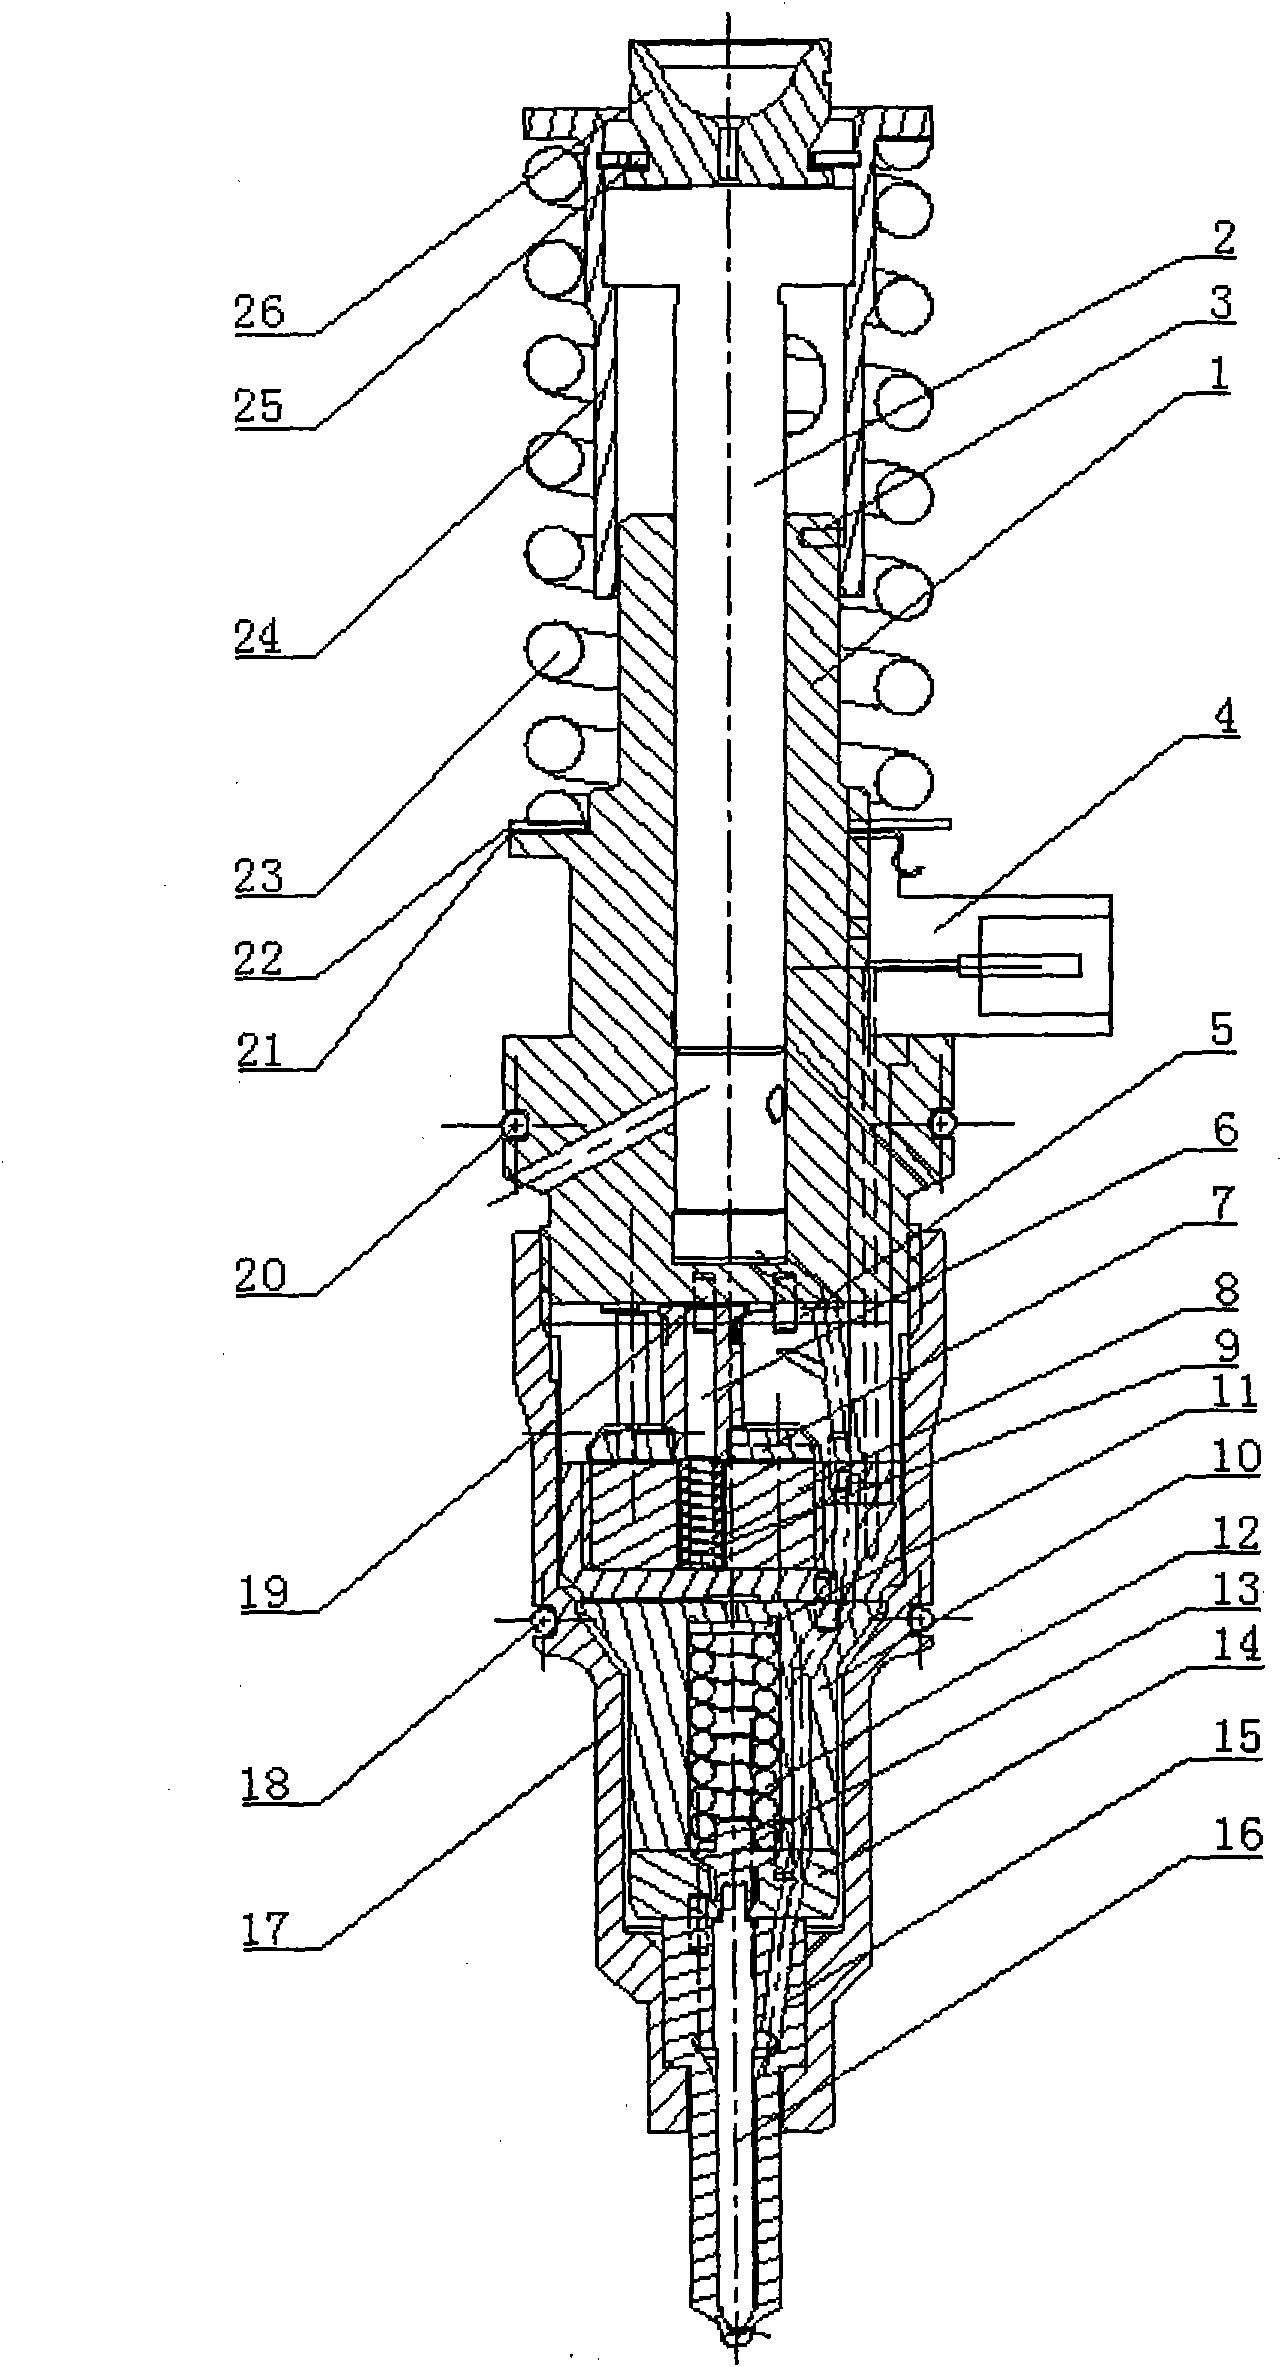 Electrically-controlled pump nozzle for injecting fuel of diesel motor